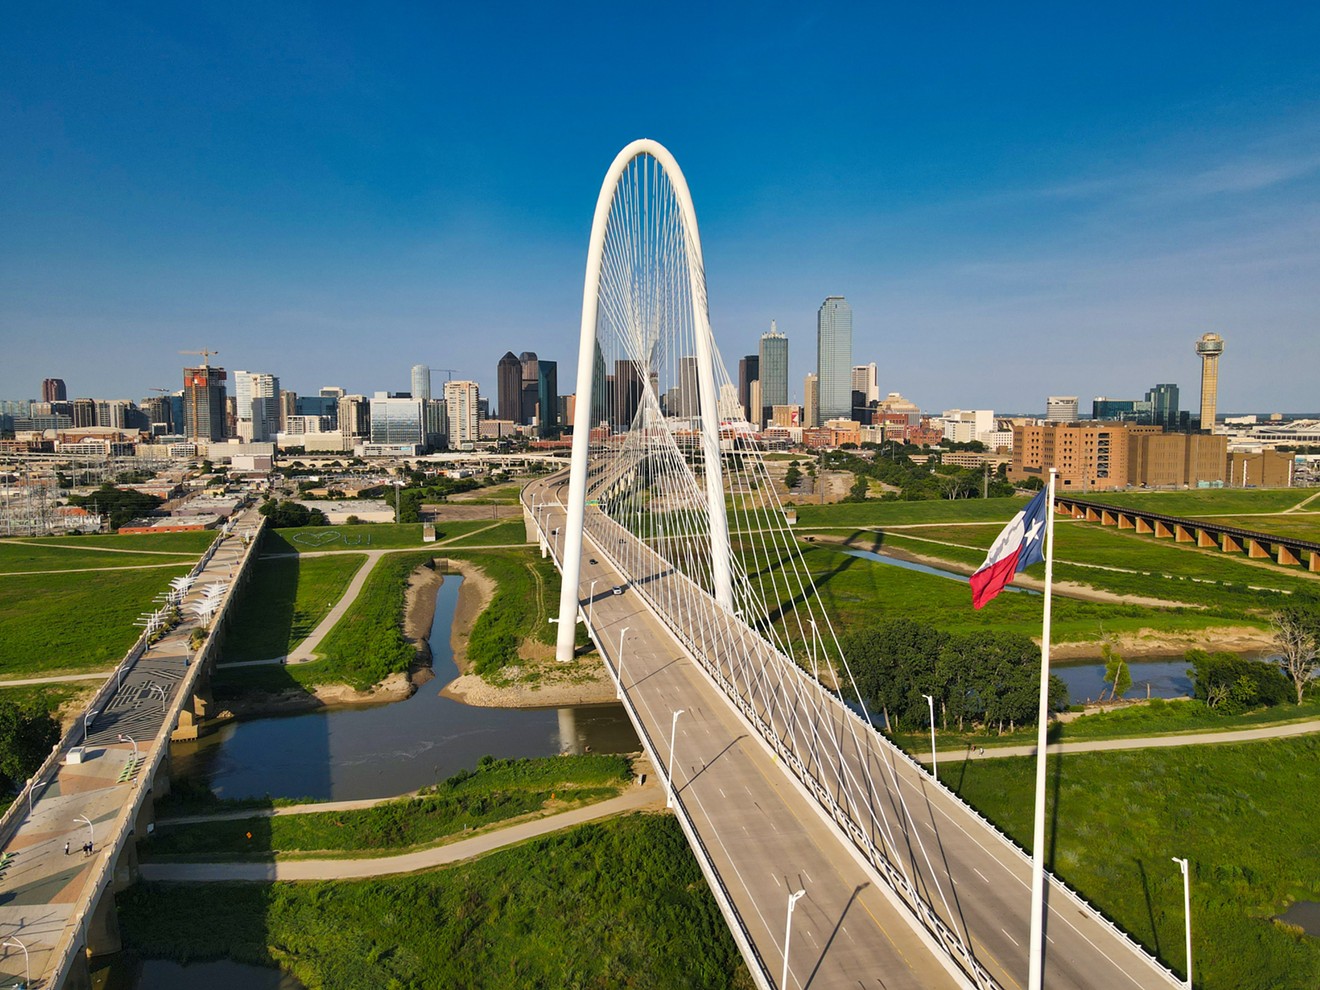 Dallas is a hot spot for winter travel.